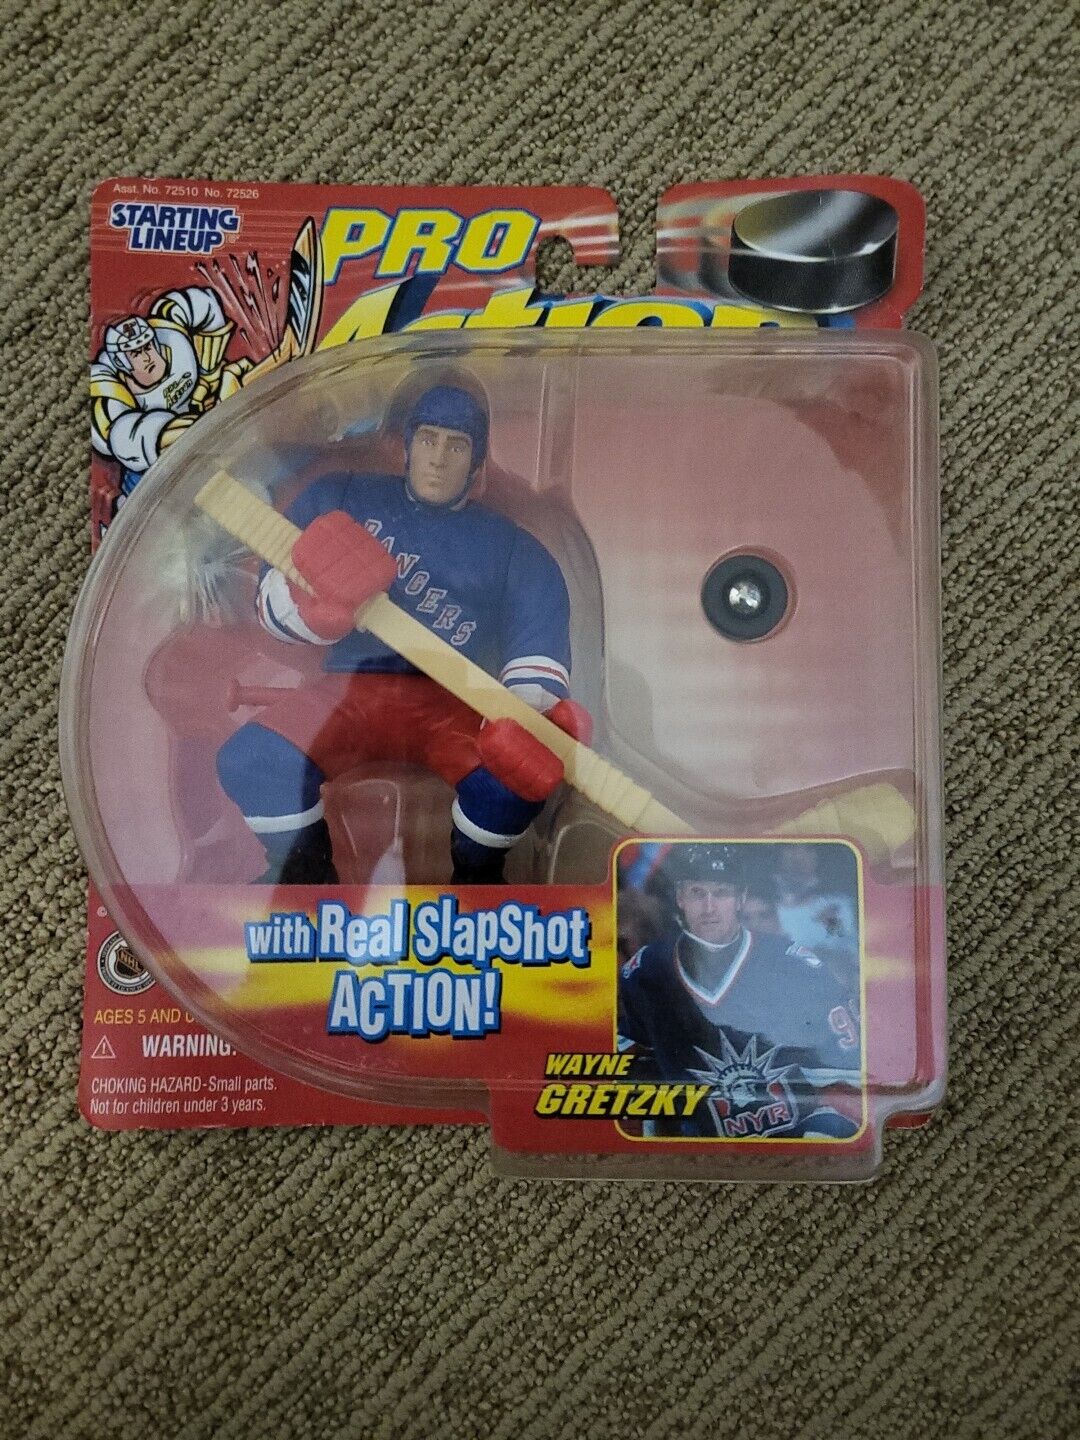 1998 WAYNE GRETZKY N Y RANGERS STARTING LINEUP PRO ACTION HOCKEY Action Figure